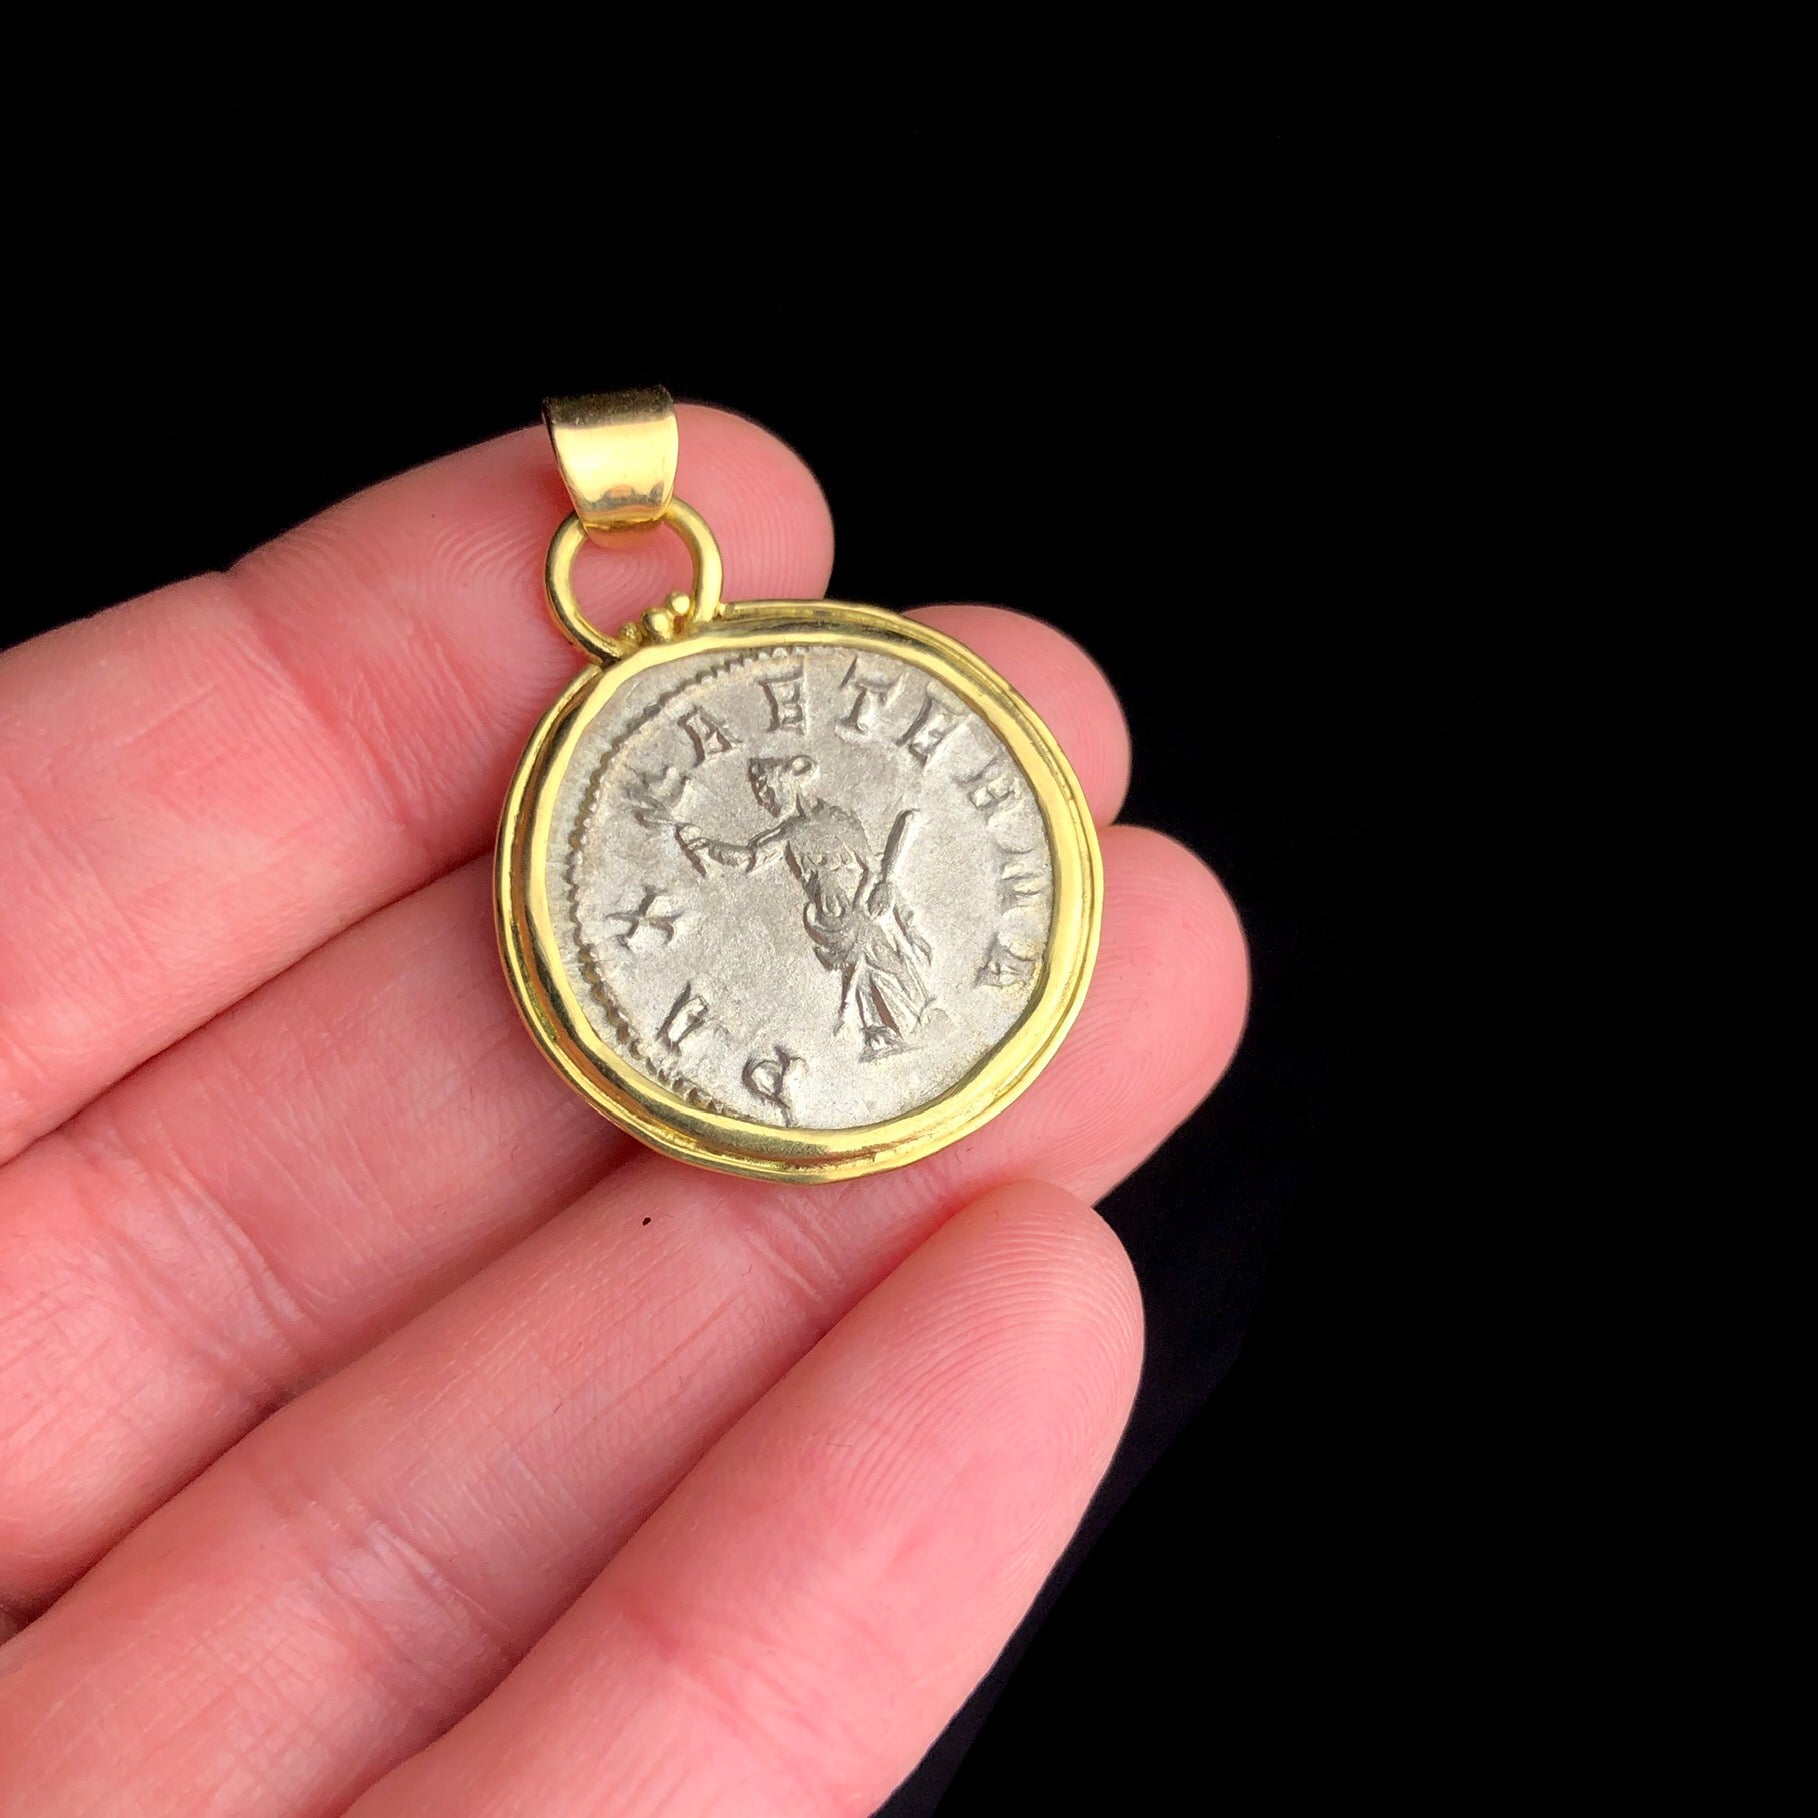 Goddess of Peace Coin Pendent shown in hand